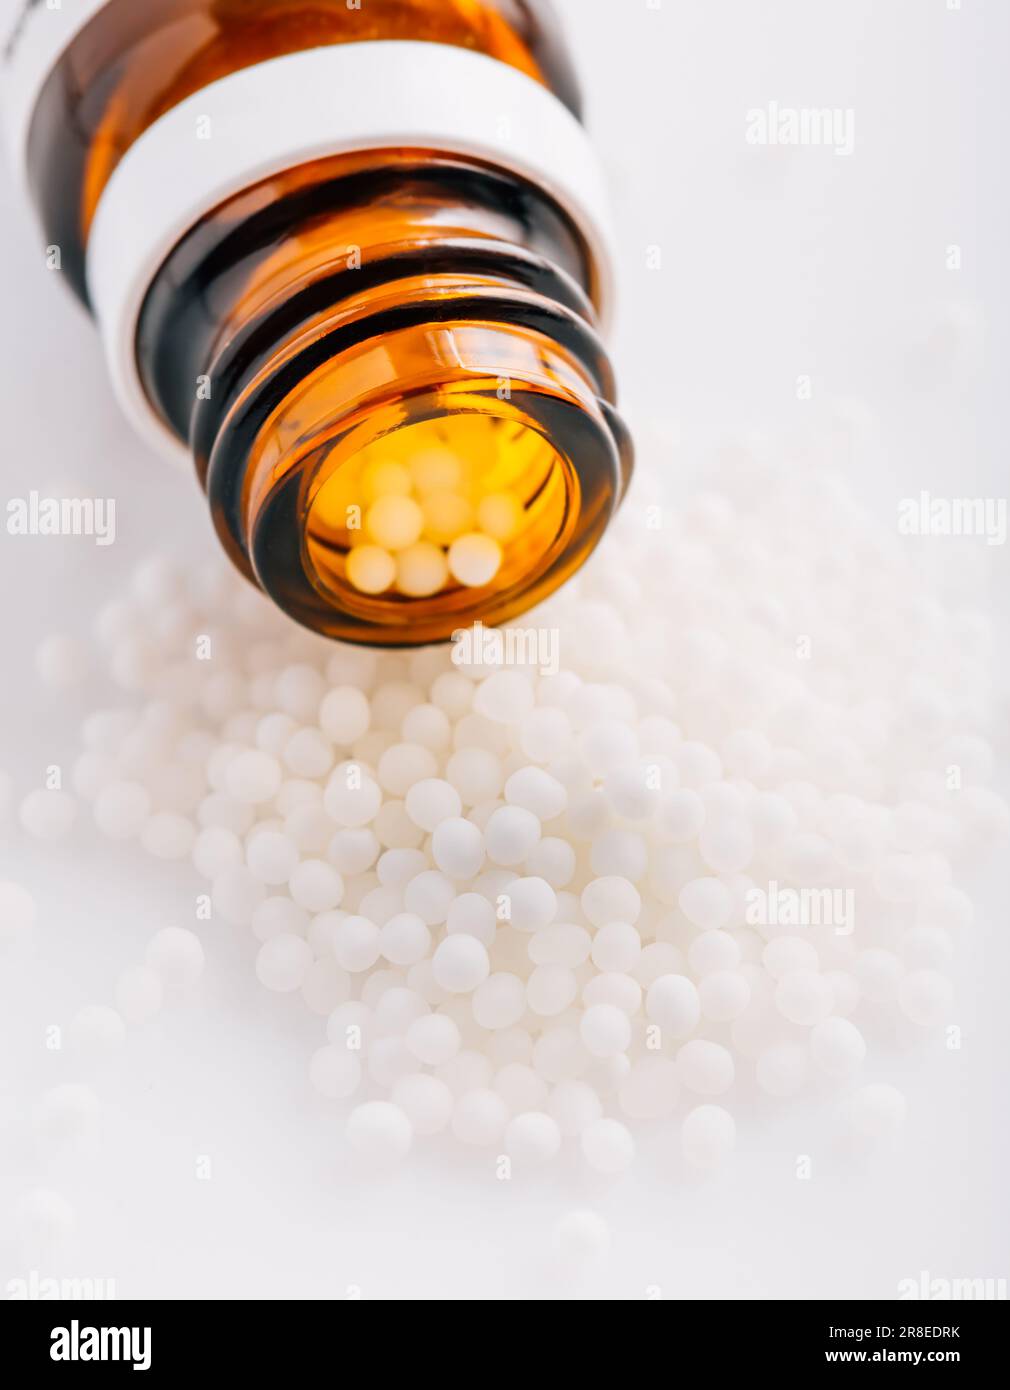 Homeopathic globules and glass bottle. Homeopathy, alternative medicine. Stock Photo